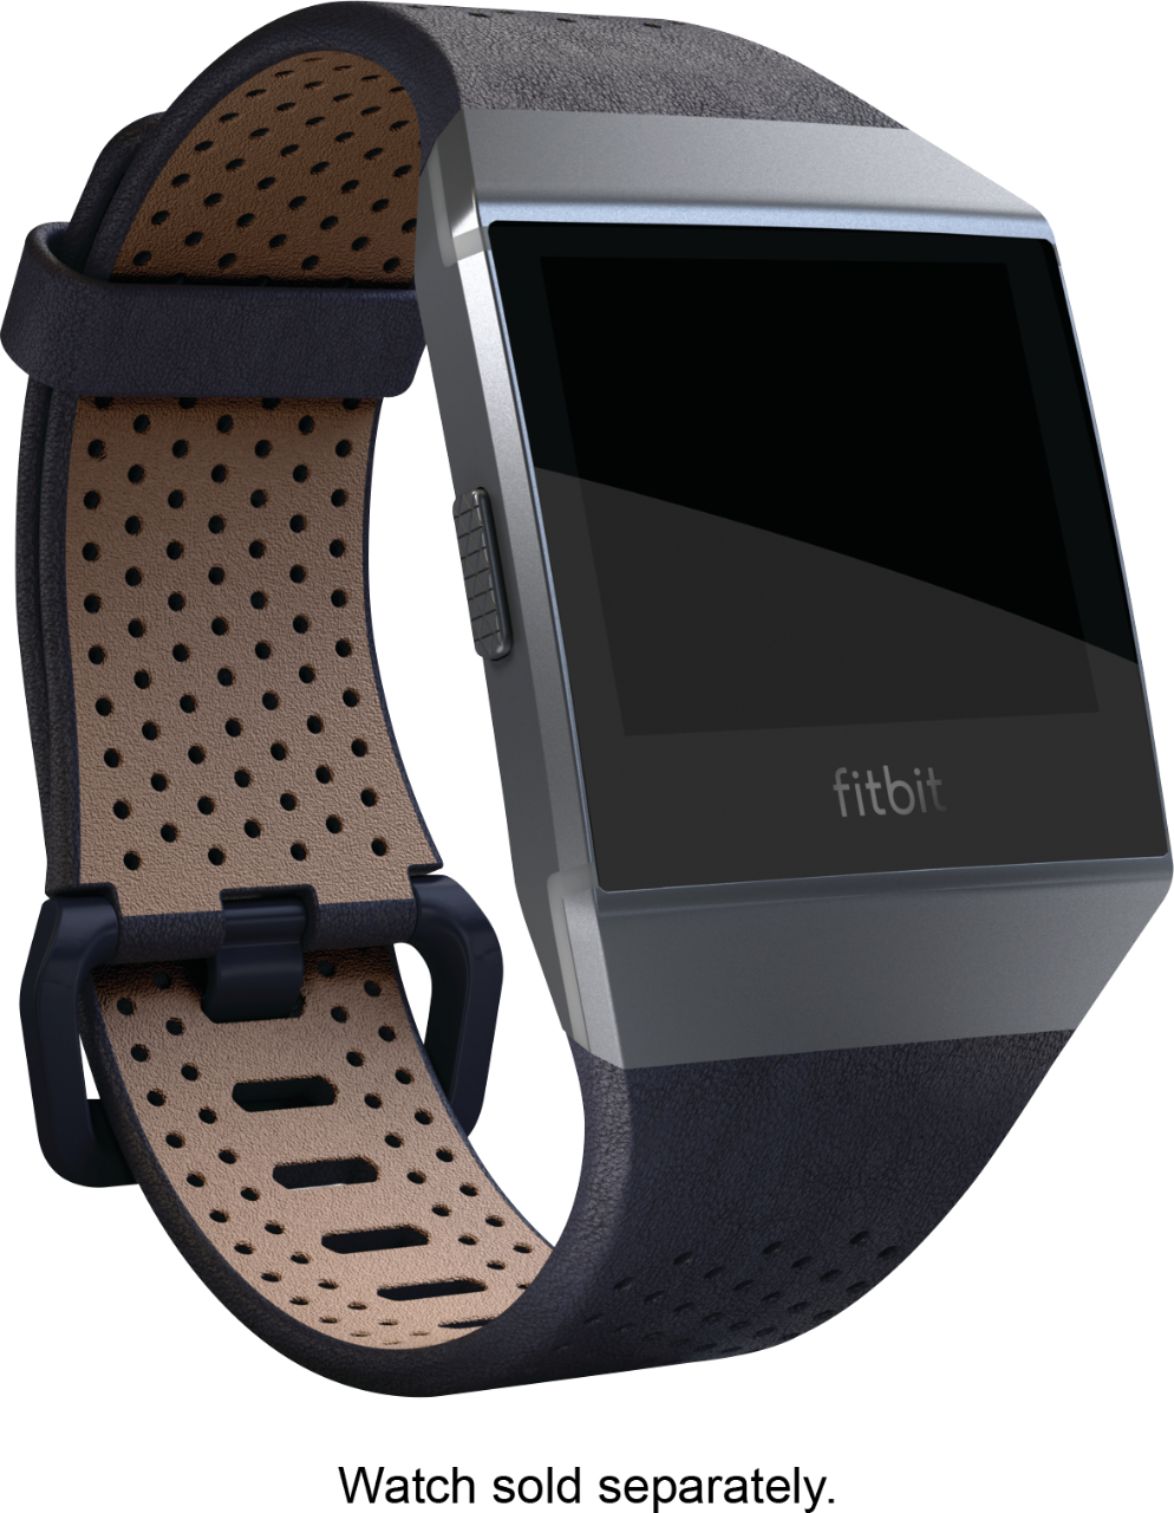 how to change fitbit ionic band